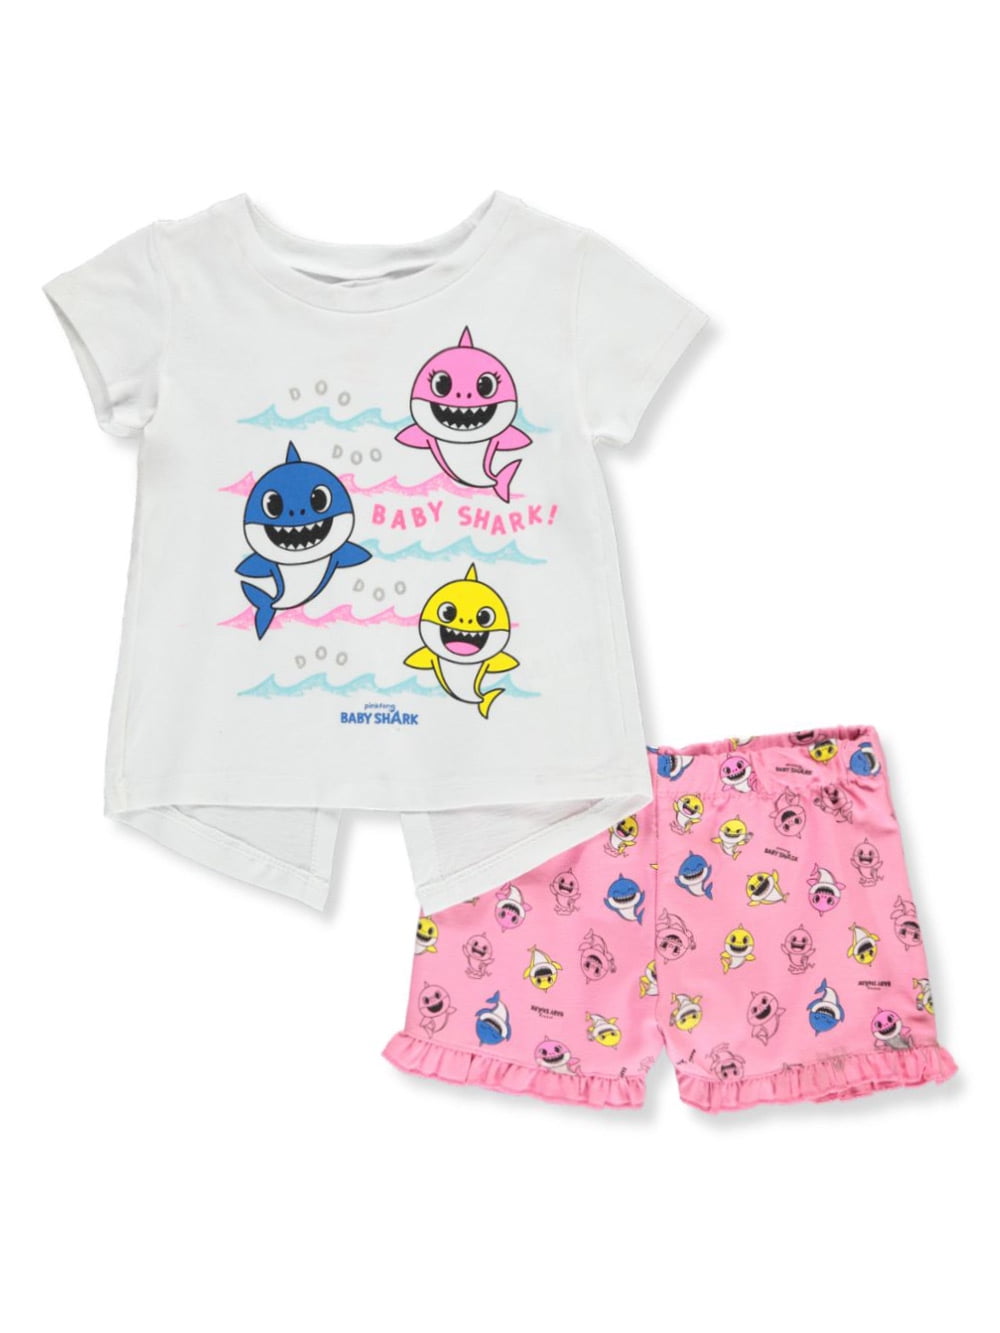 Baby Shark - Baby Shark Baby Girls' 2-Piece Shorts Set Outfit (Infant